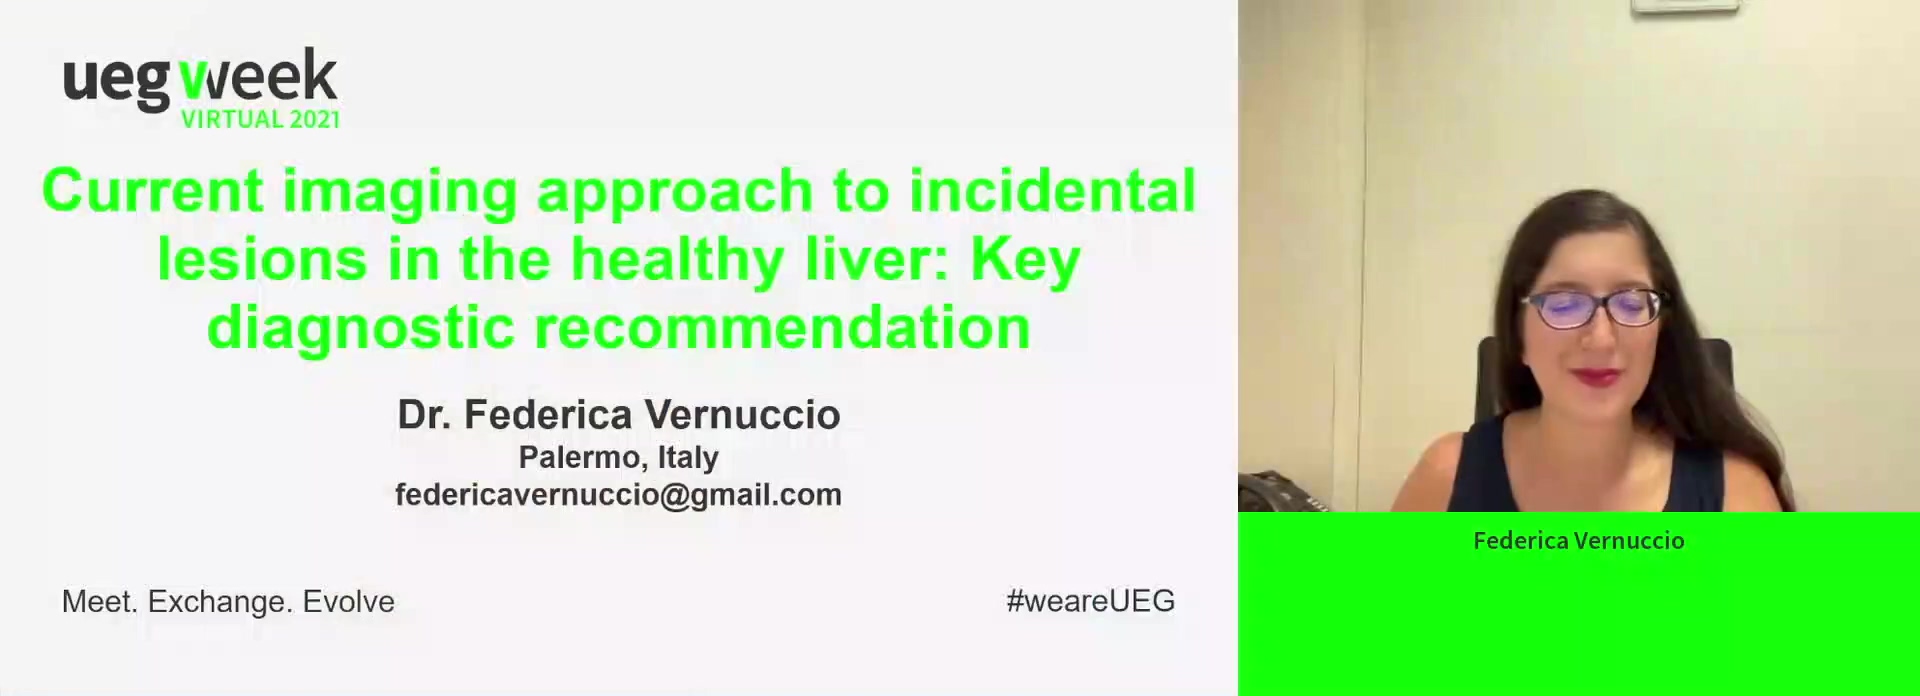 Current imaging approach to incidental lesions in the healthy liver: Key diagnostic recommendation